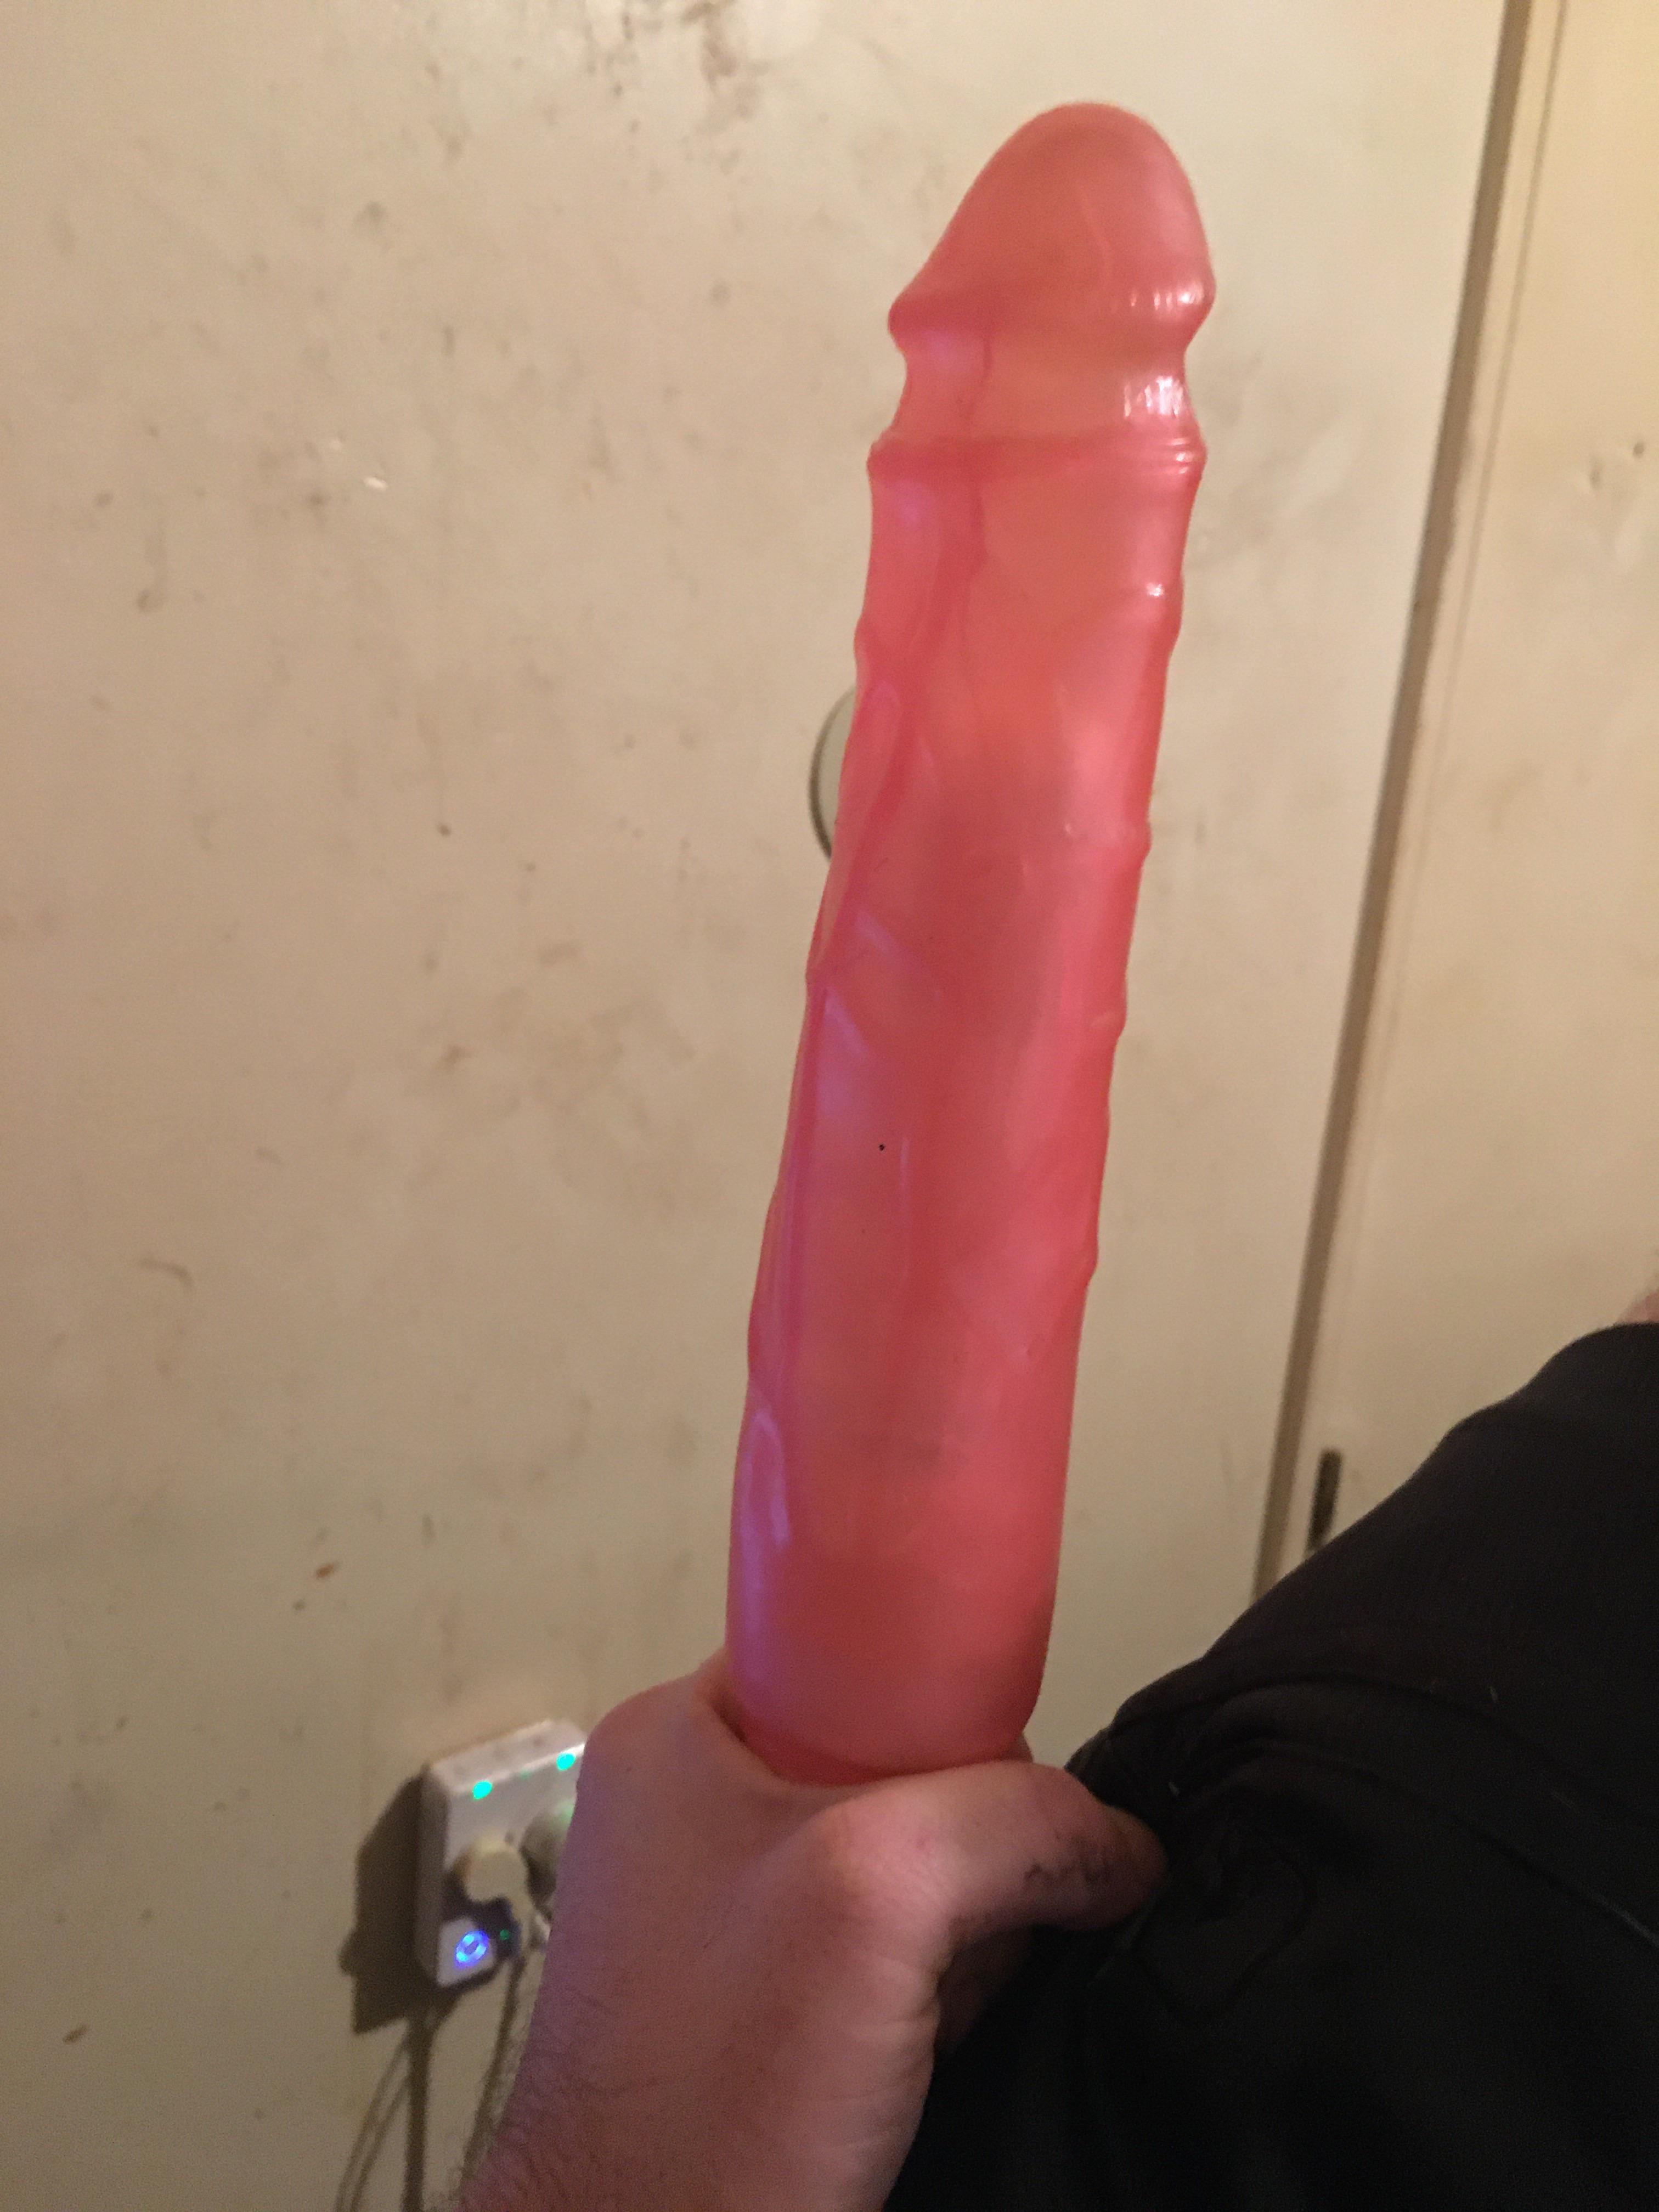 Asked my wife why she bought such a huge dildo her answer because I want you to see how much black cock I can take Scrolller